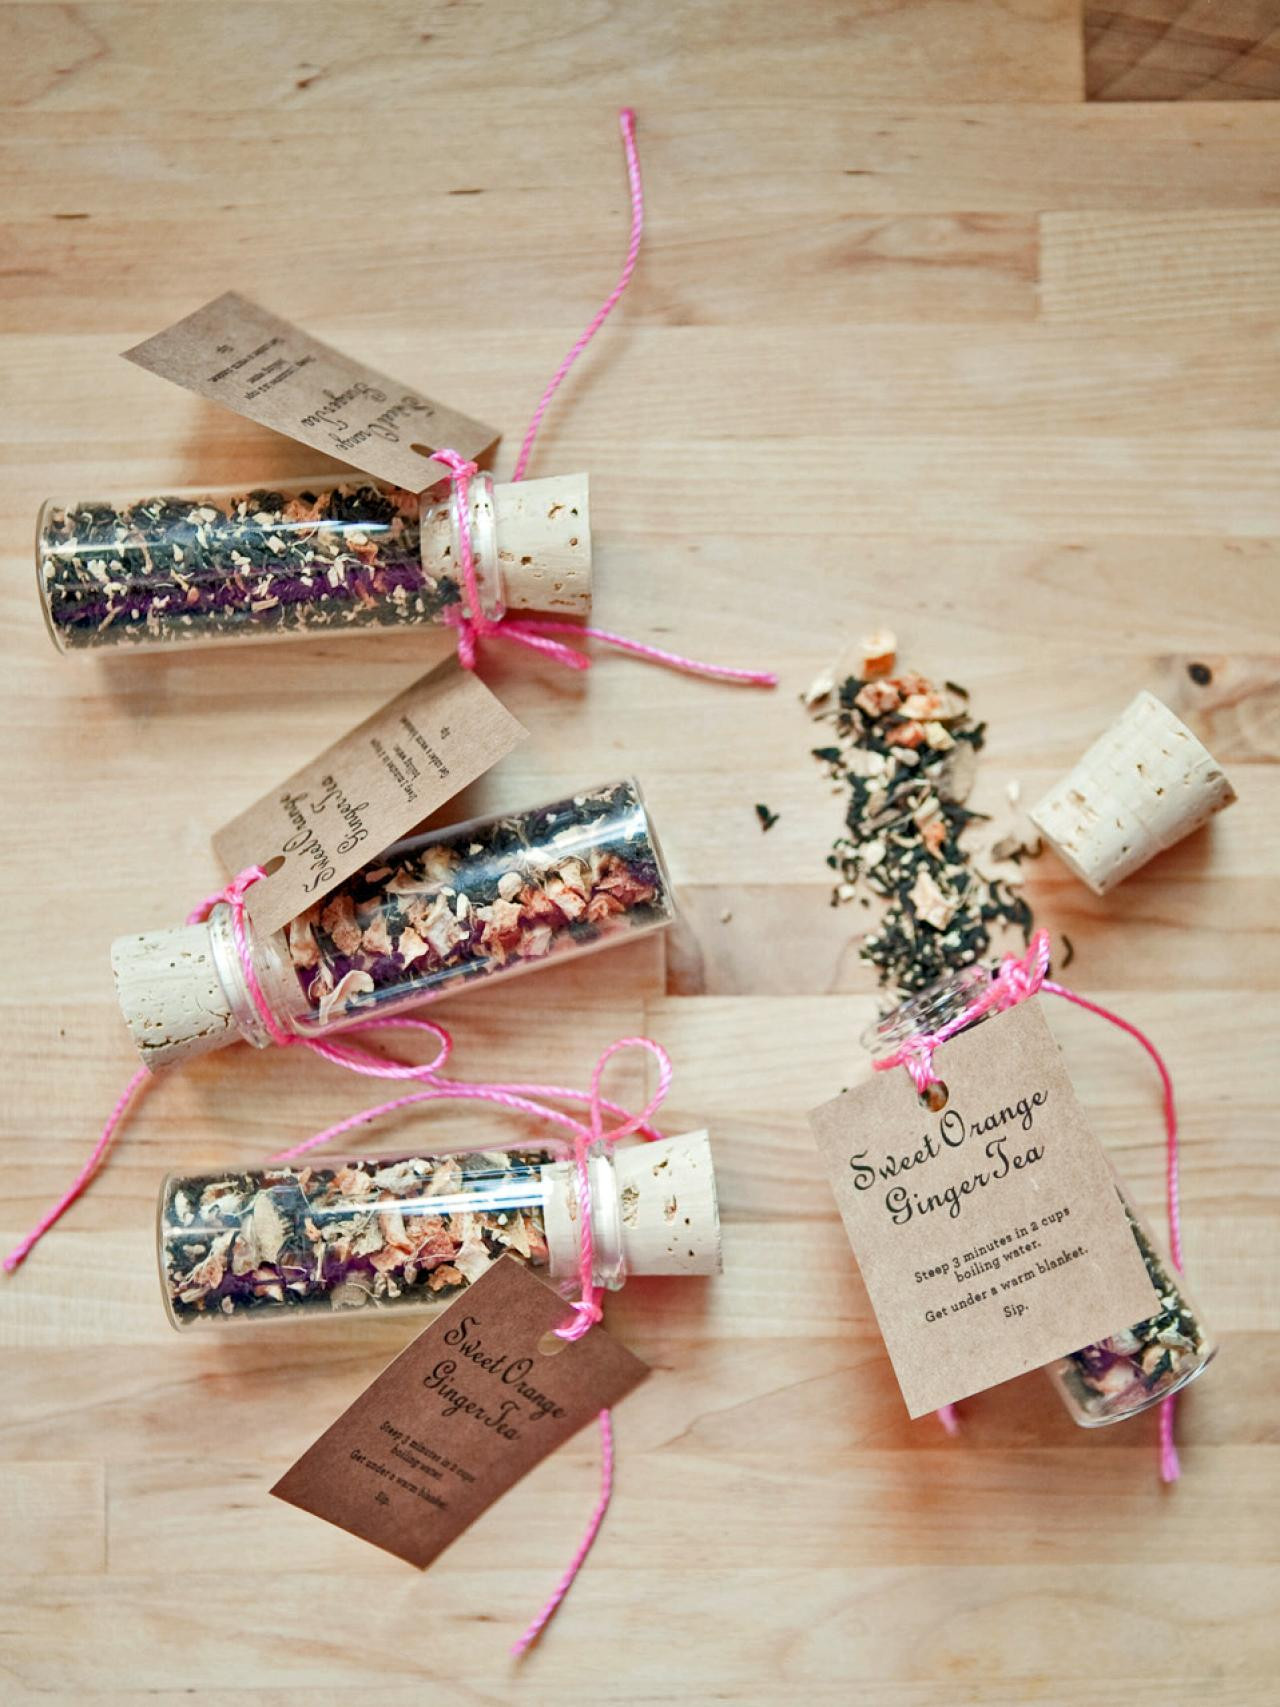 Office Christmas Party Favor Ideas
 30 Festive DIY Holiday Party Favors